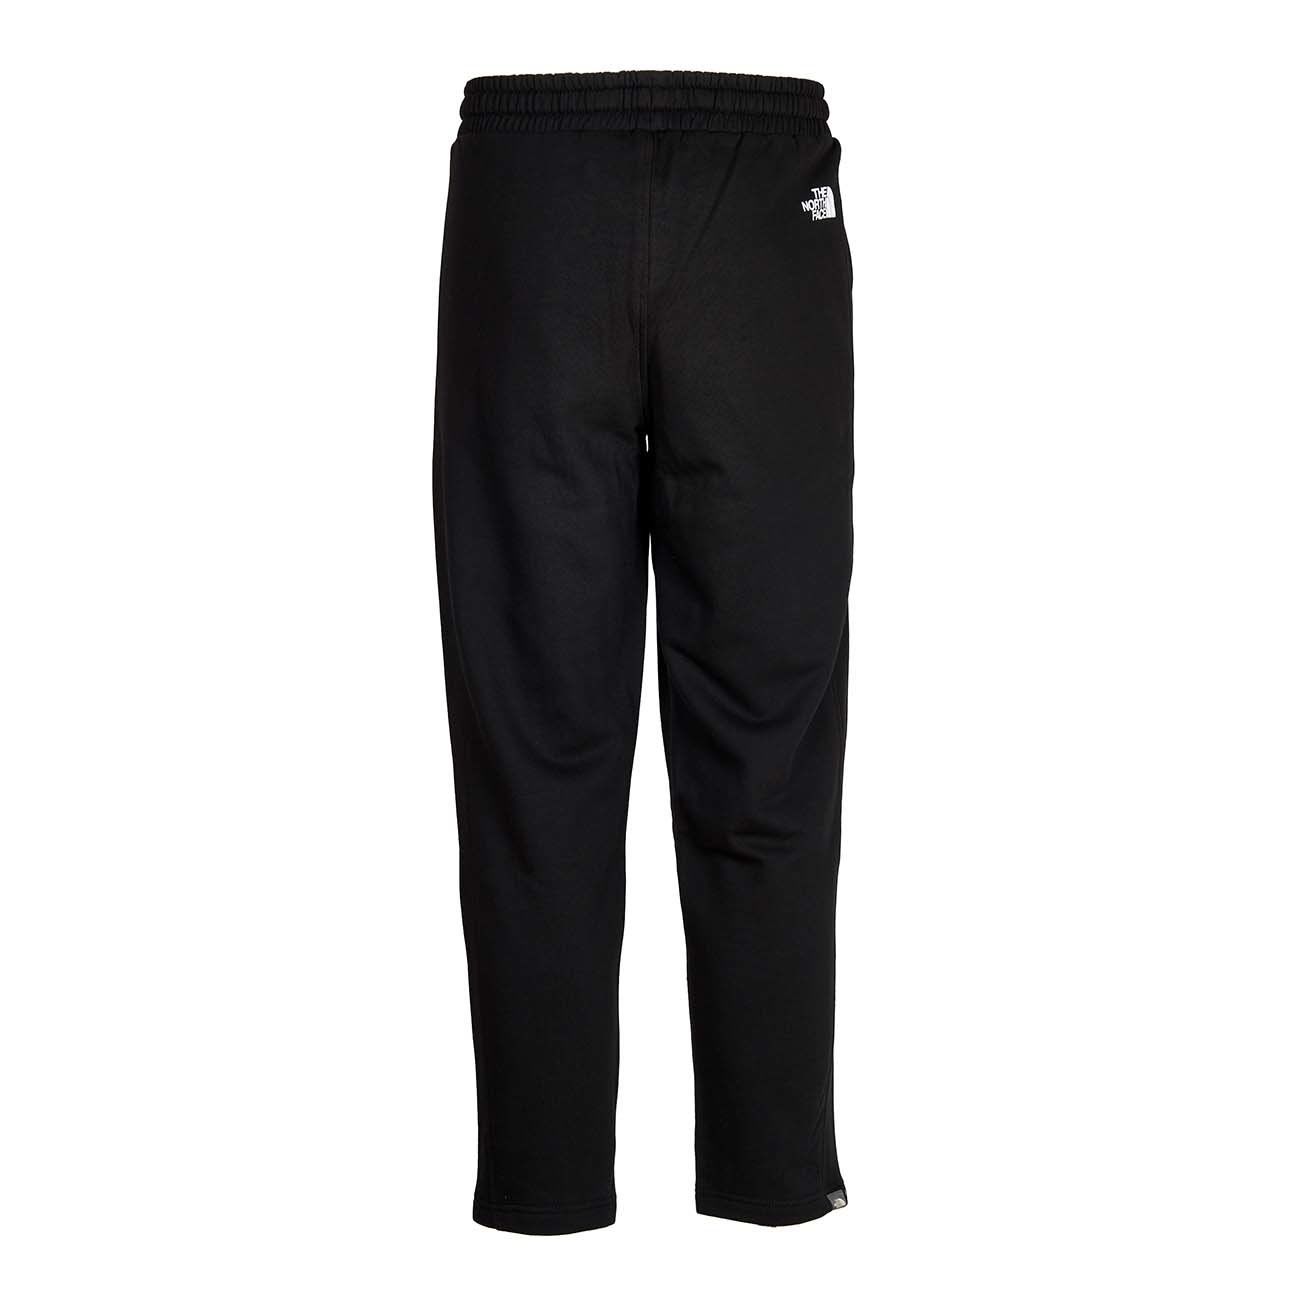 THE NORTH FACE STANDARD SWEAT PANTS WITH LOGO Man Black